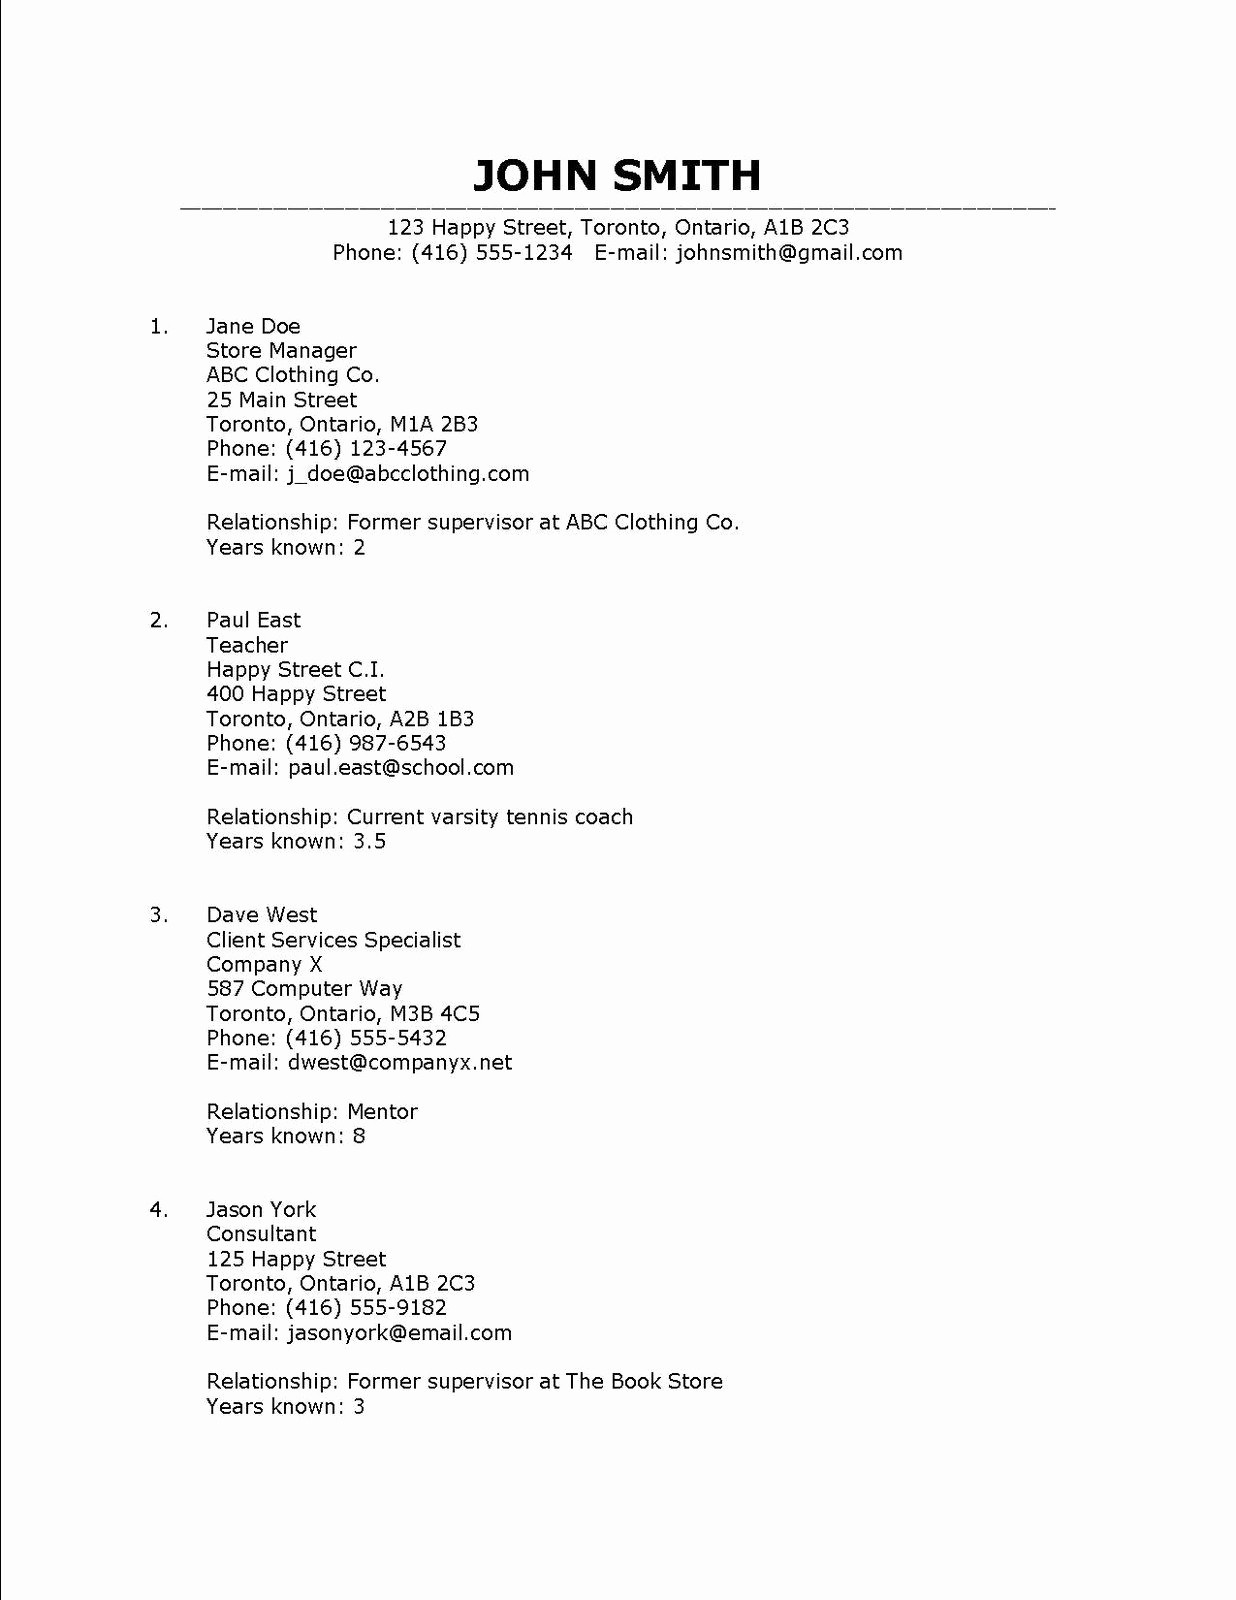 Listing References On A Resume Lovely Resume References Google Search